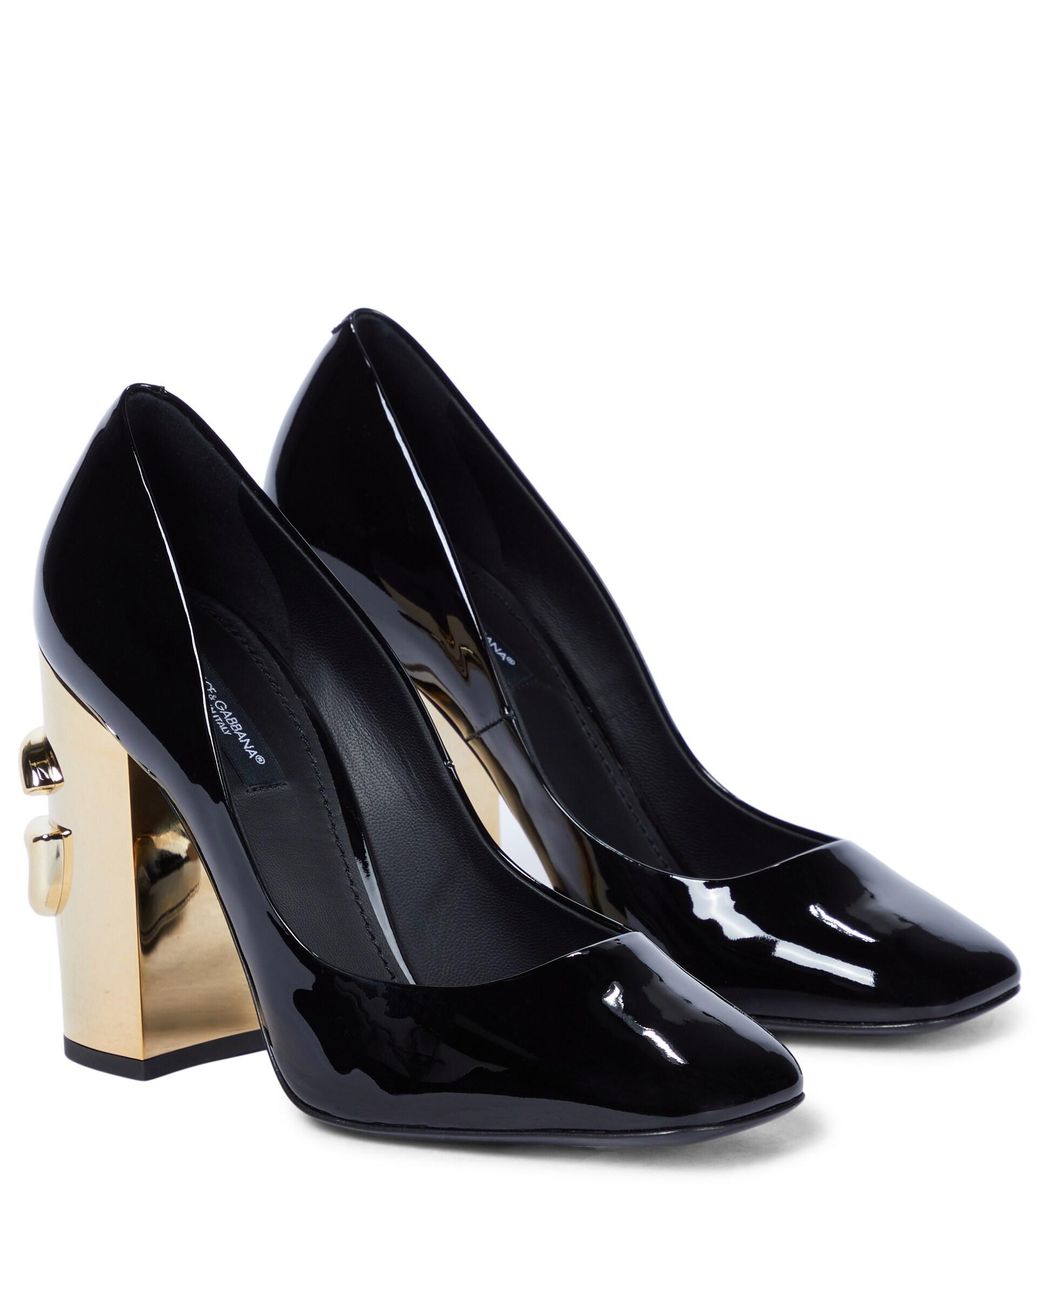 Dolce & Gabbana Jackie 105mm Patent Leather Pumps in Black/Gold (Black ...